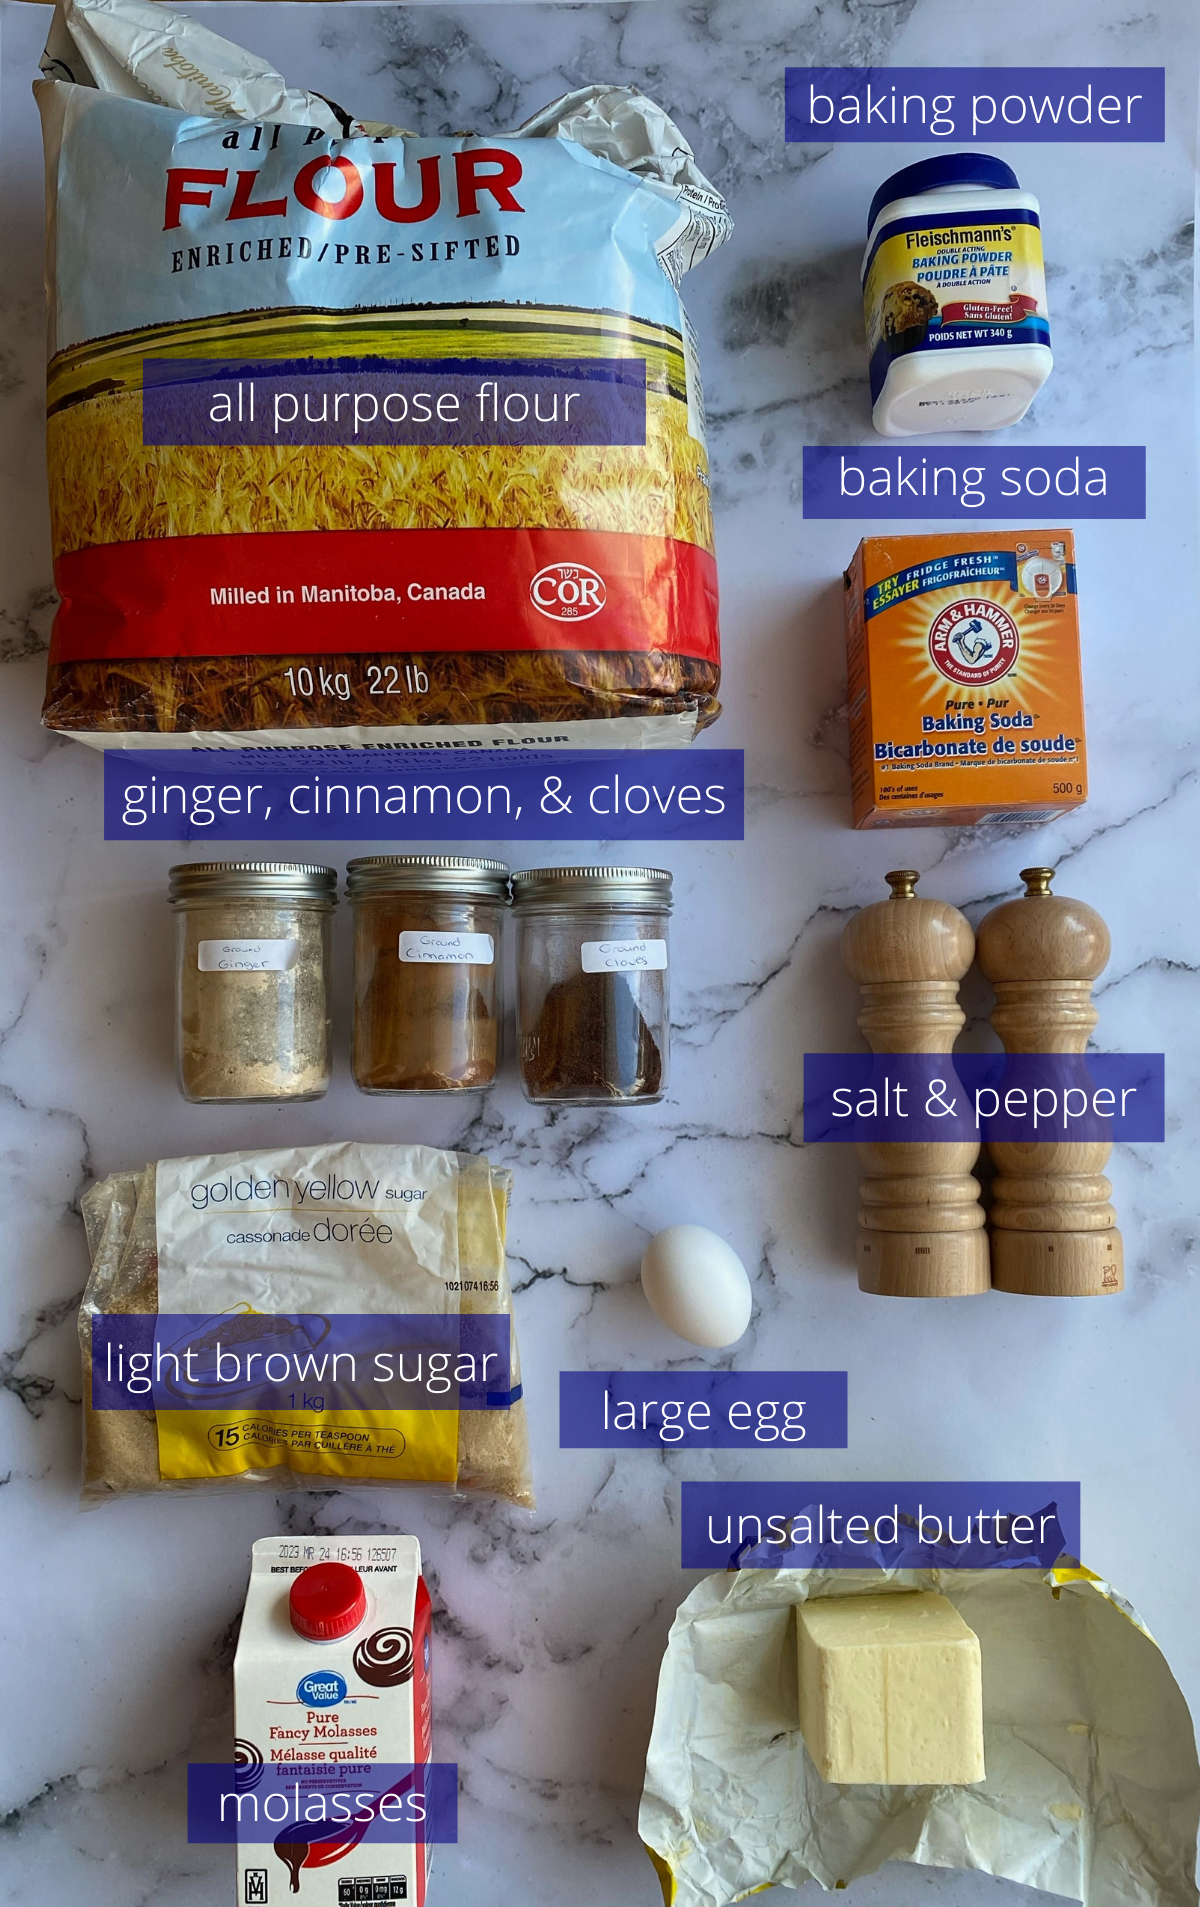 All the ingredients needed to make these cookies.